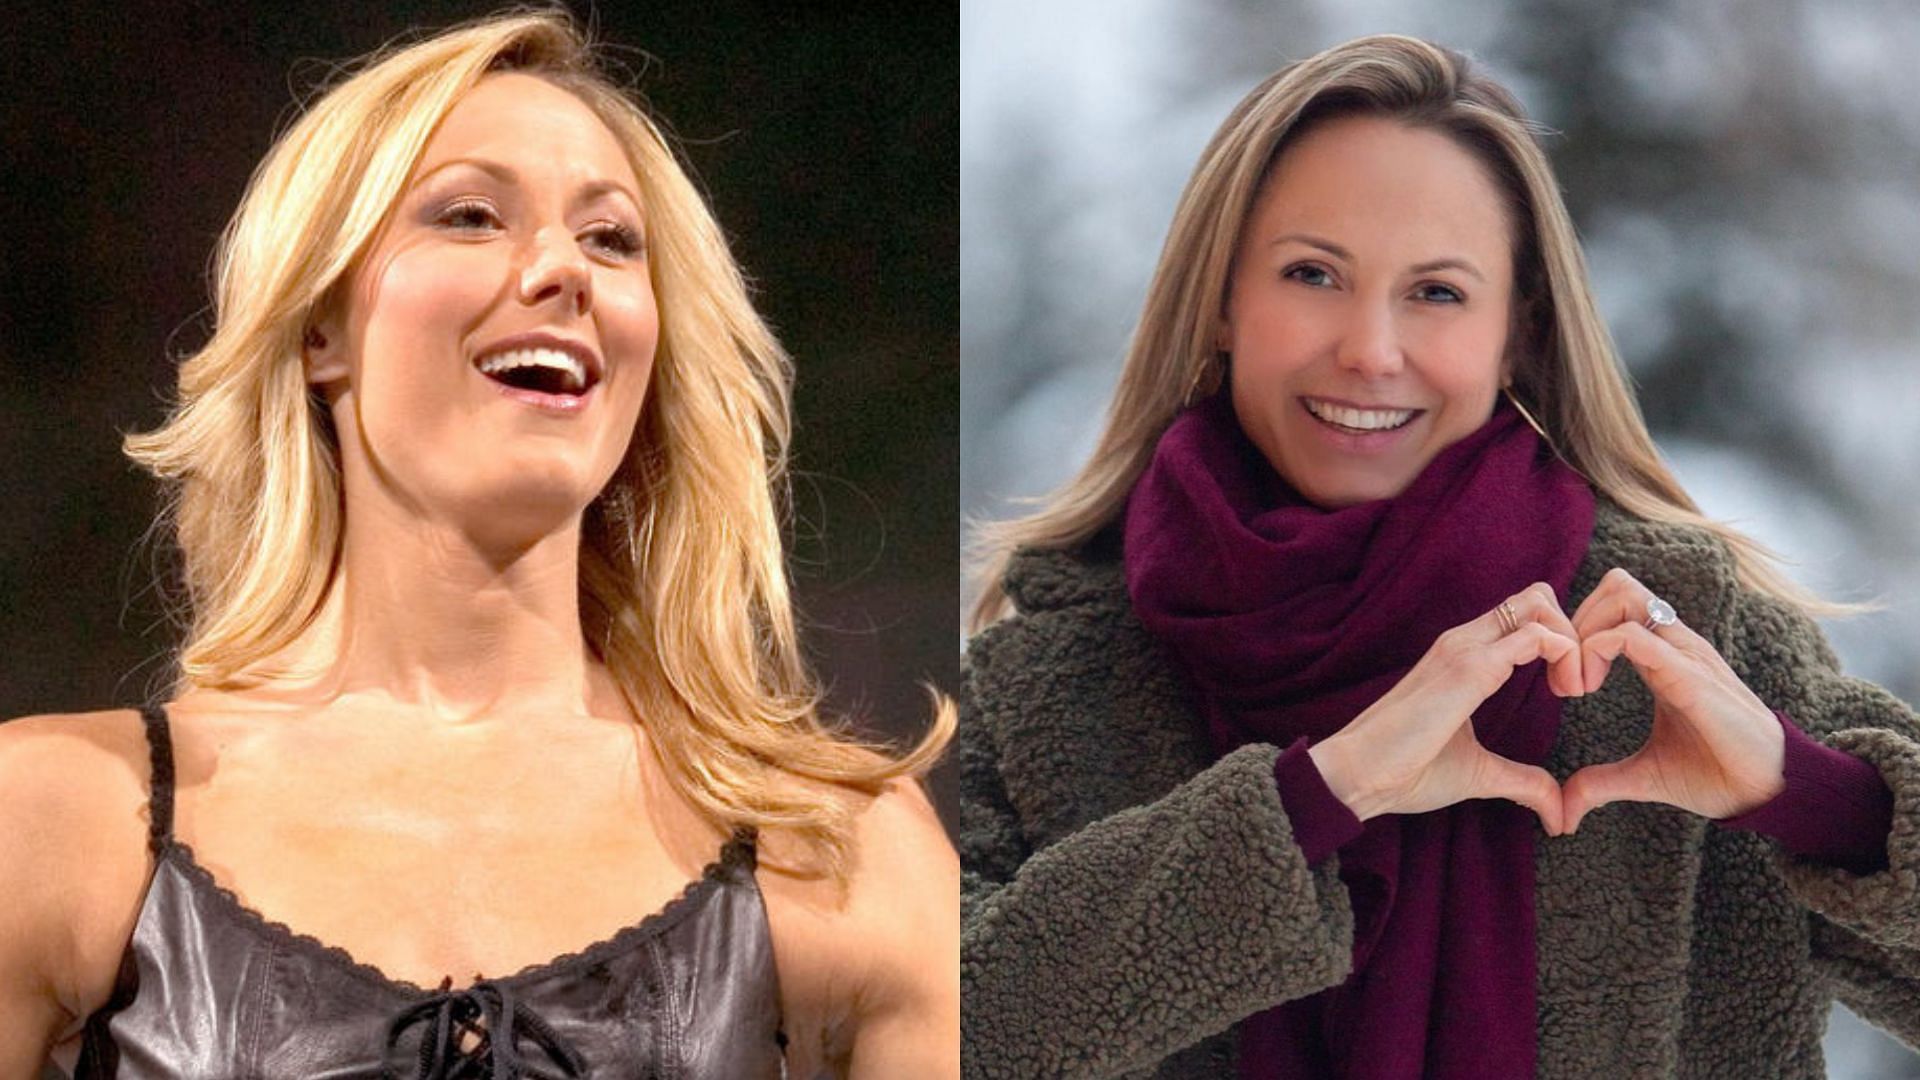 Stacy Keibler will be honored this weekend.